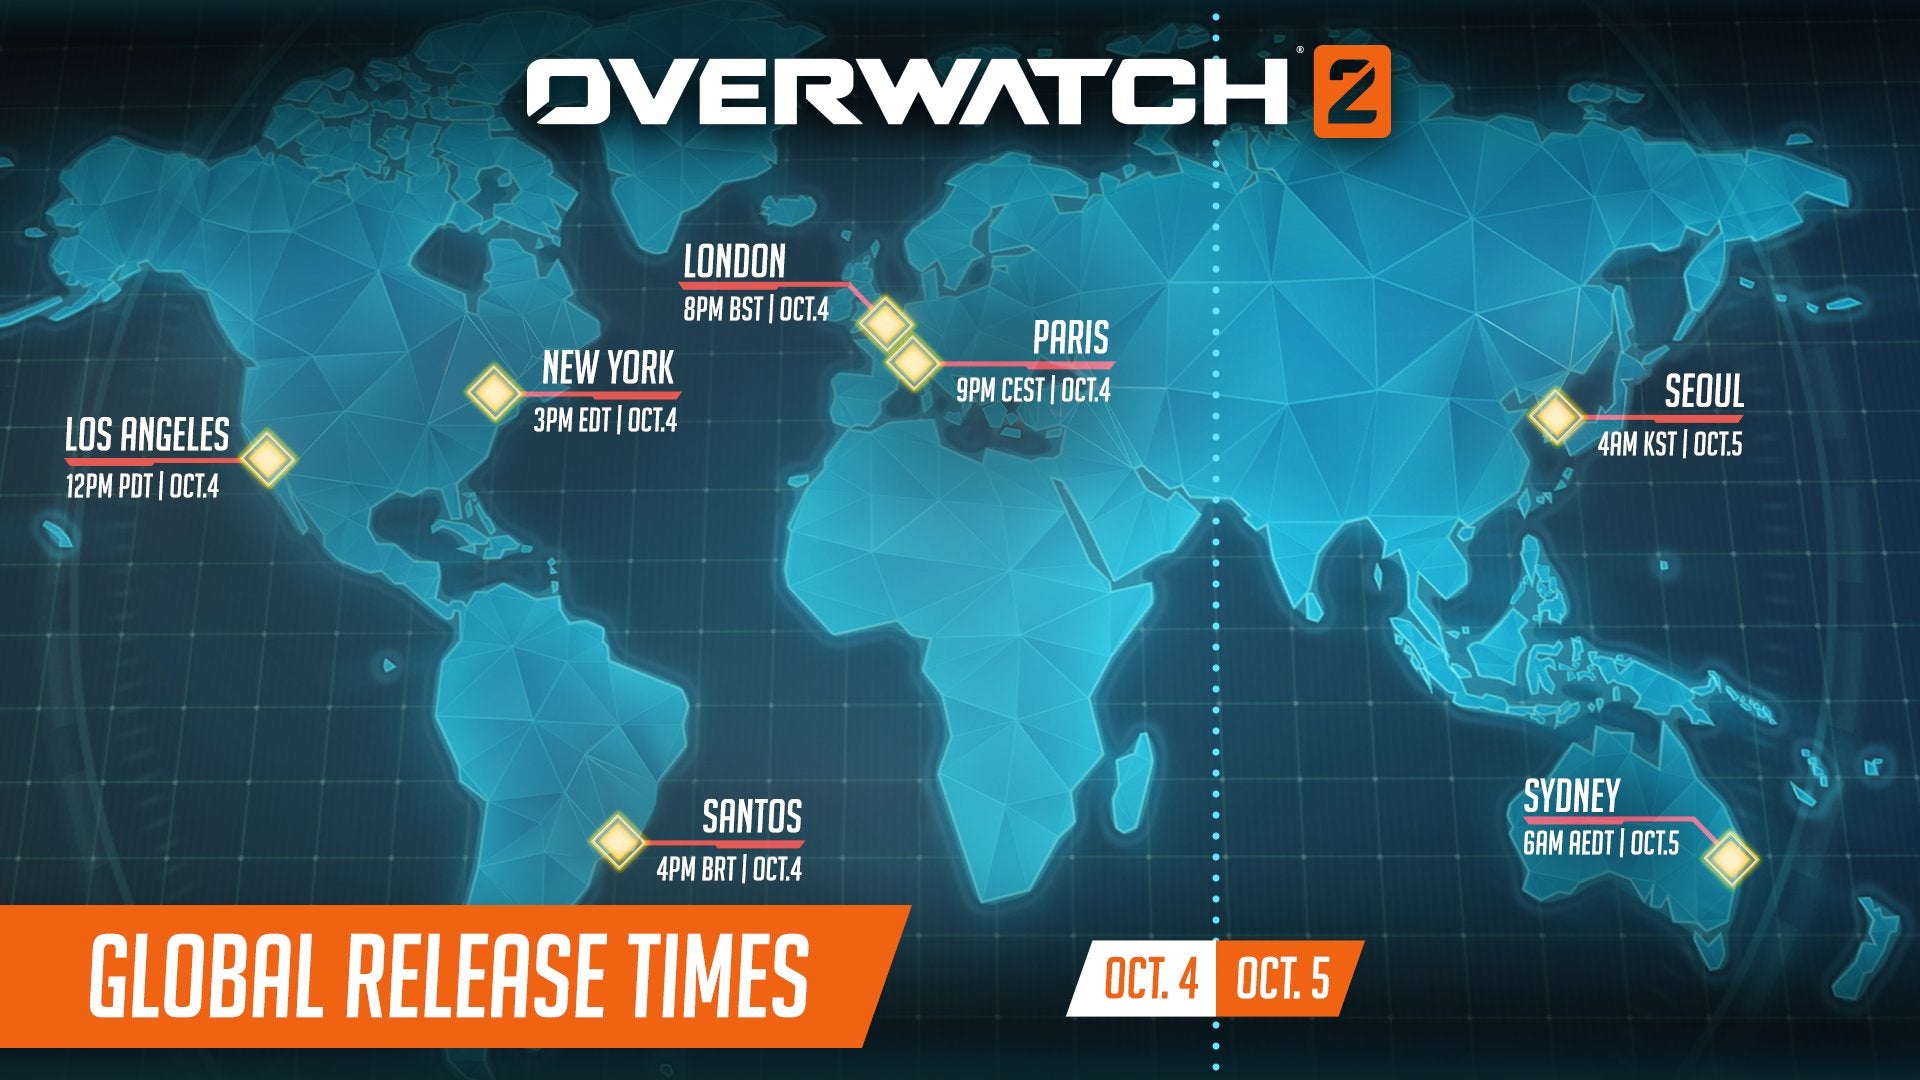 Overwatch 2 release times